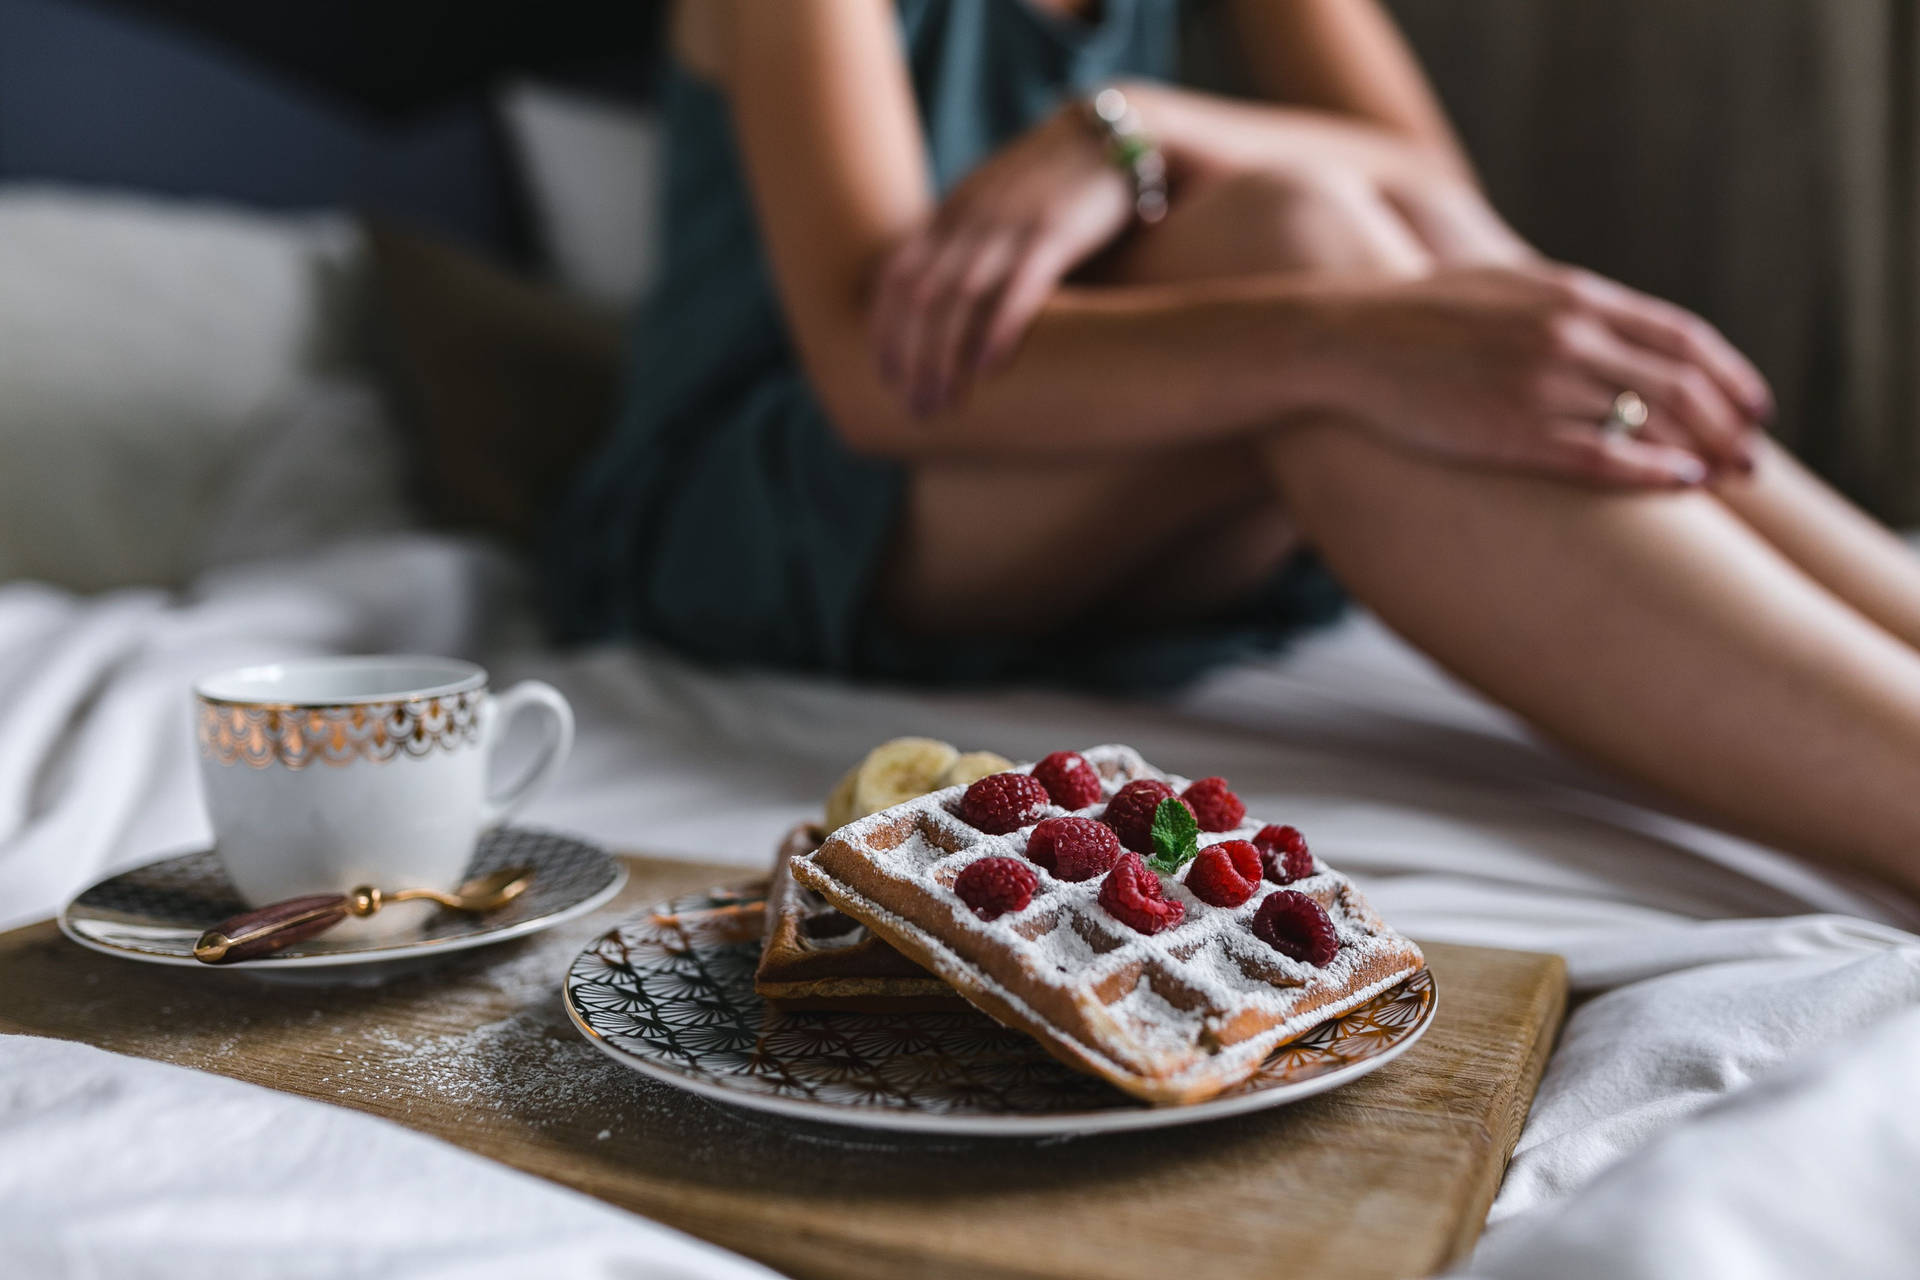 Caption: Crisp Golden Waffles Served For A Relaxing Breakfast In Bed